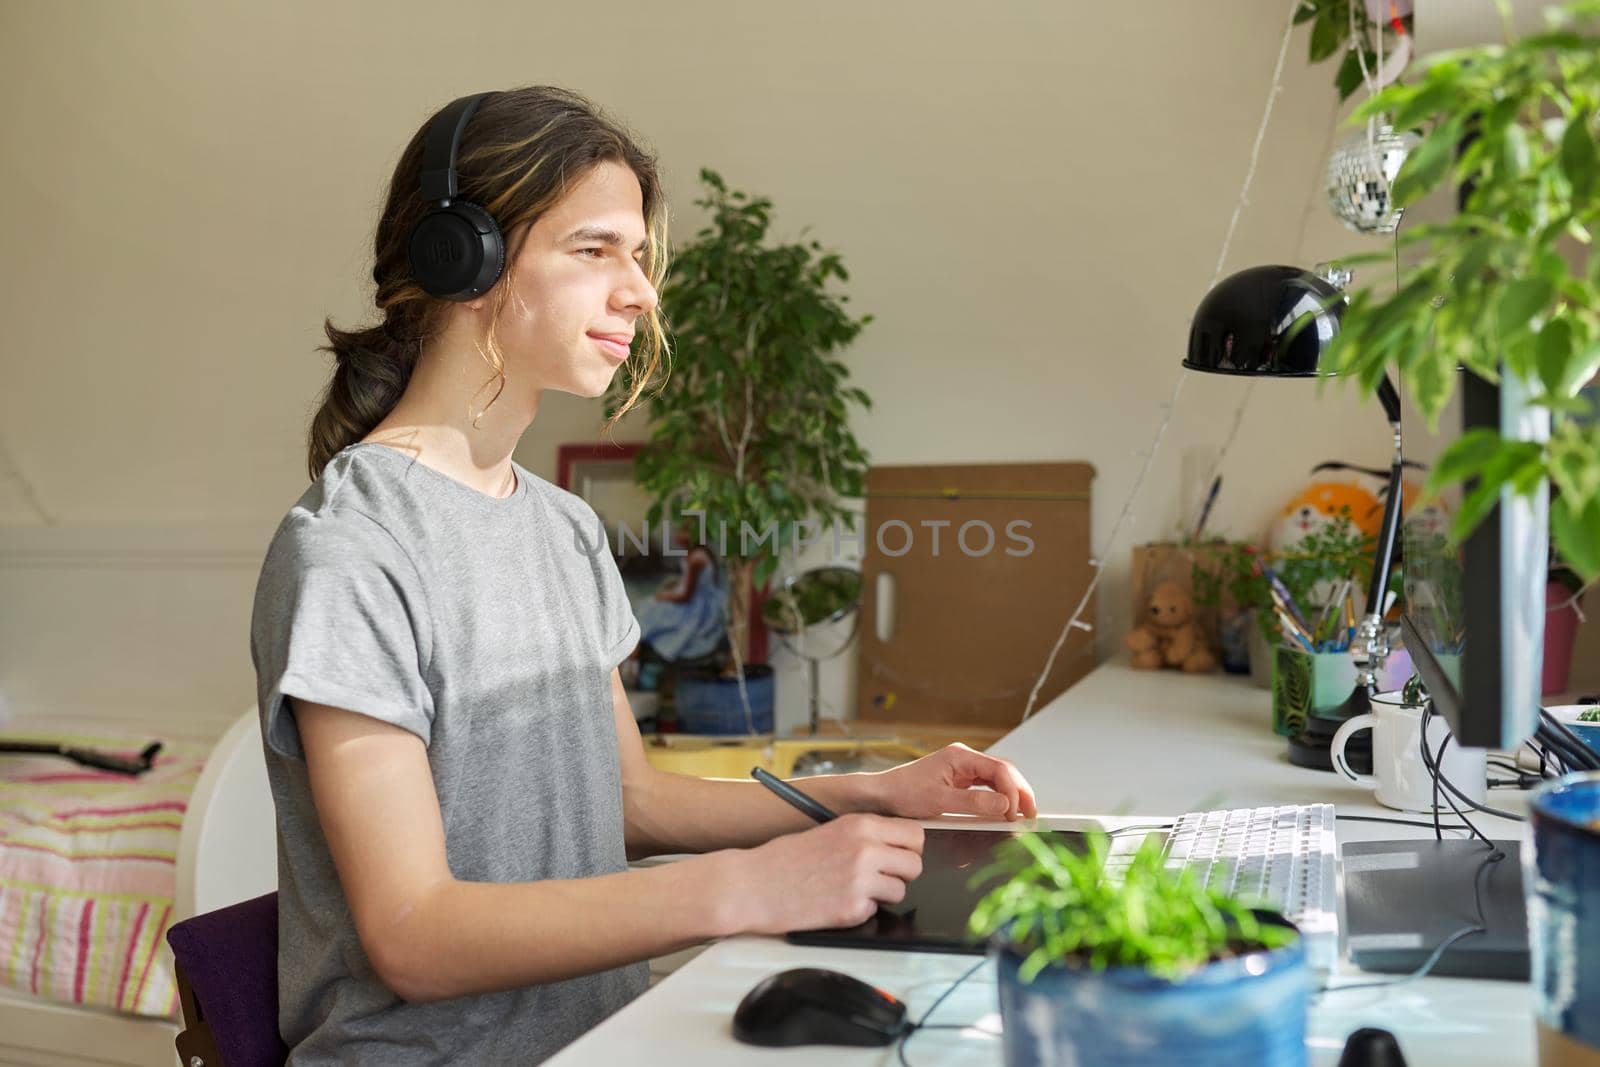 Teenage guy in headphones sitting at home using computer and a graphics tablet by VH-studio